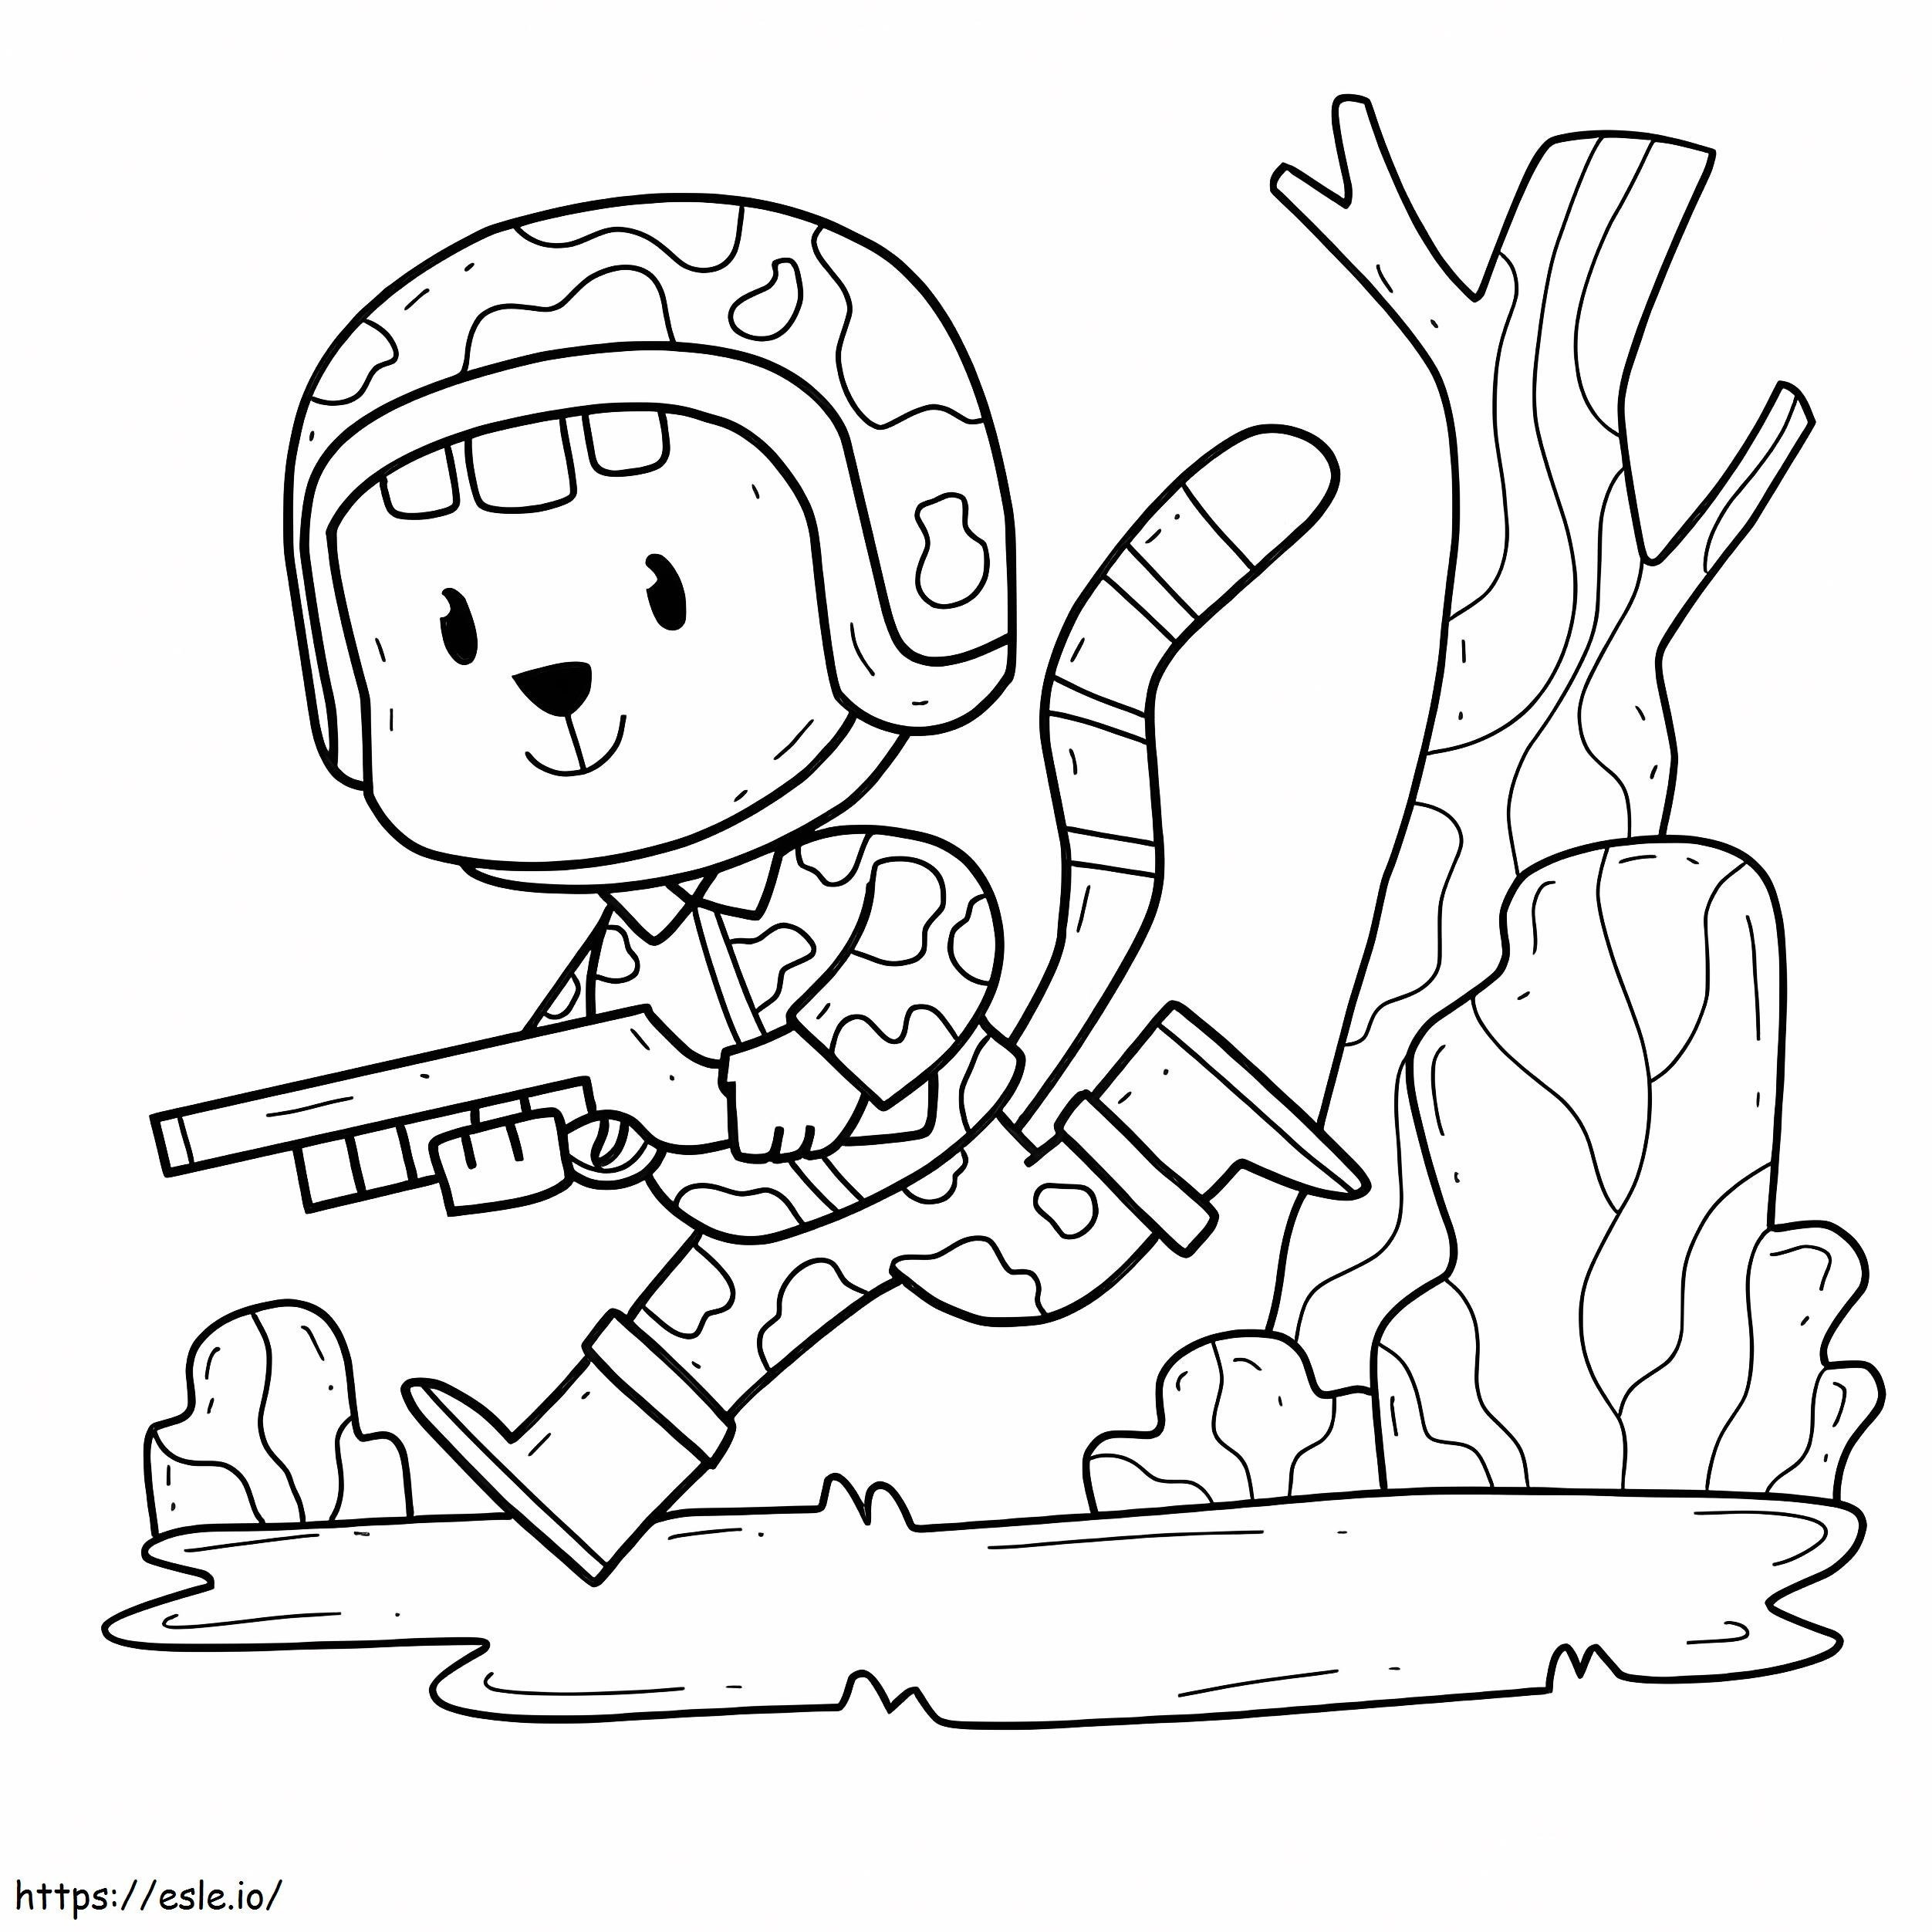 Monkey Soldier Running coloring page